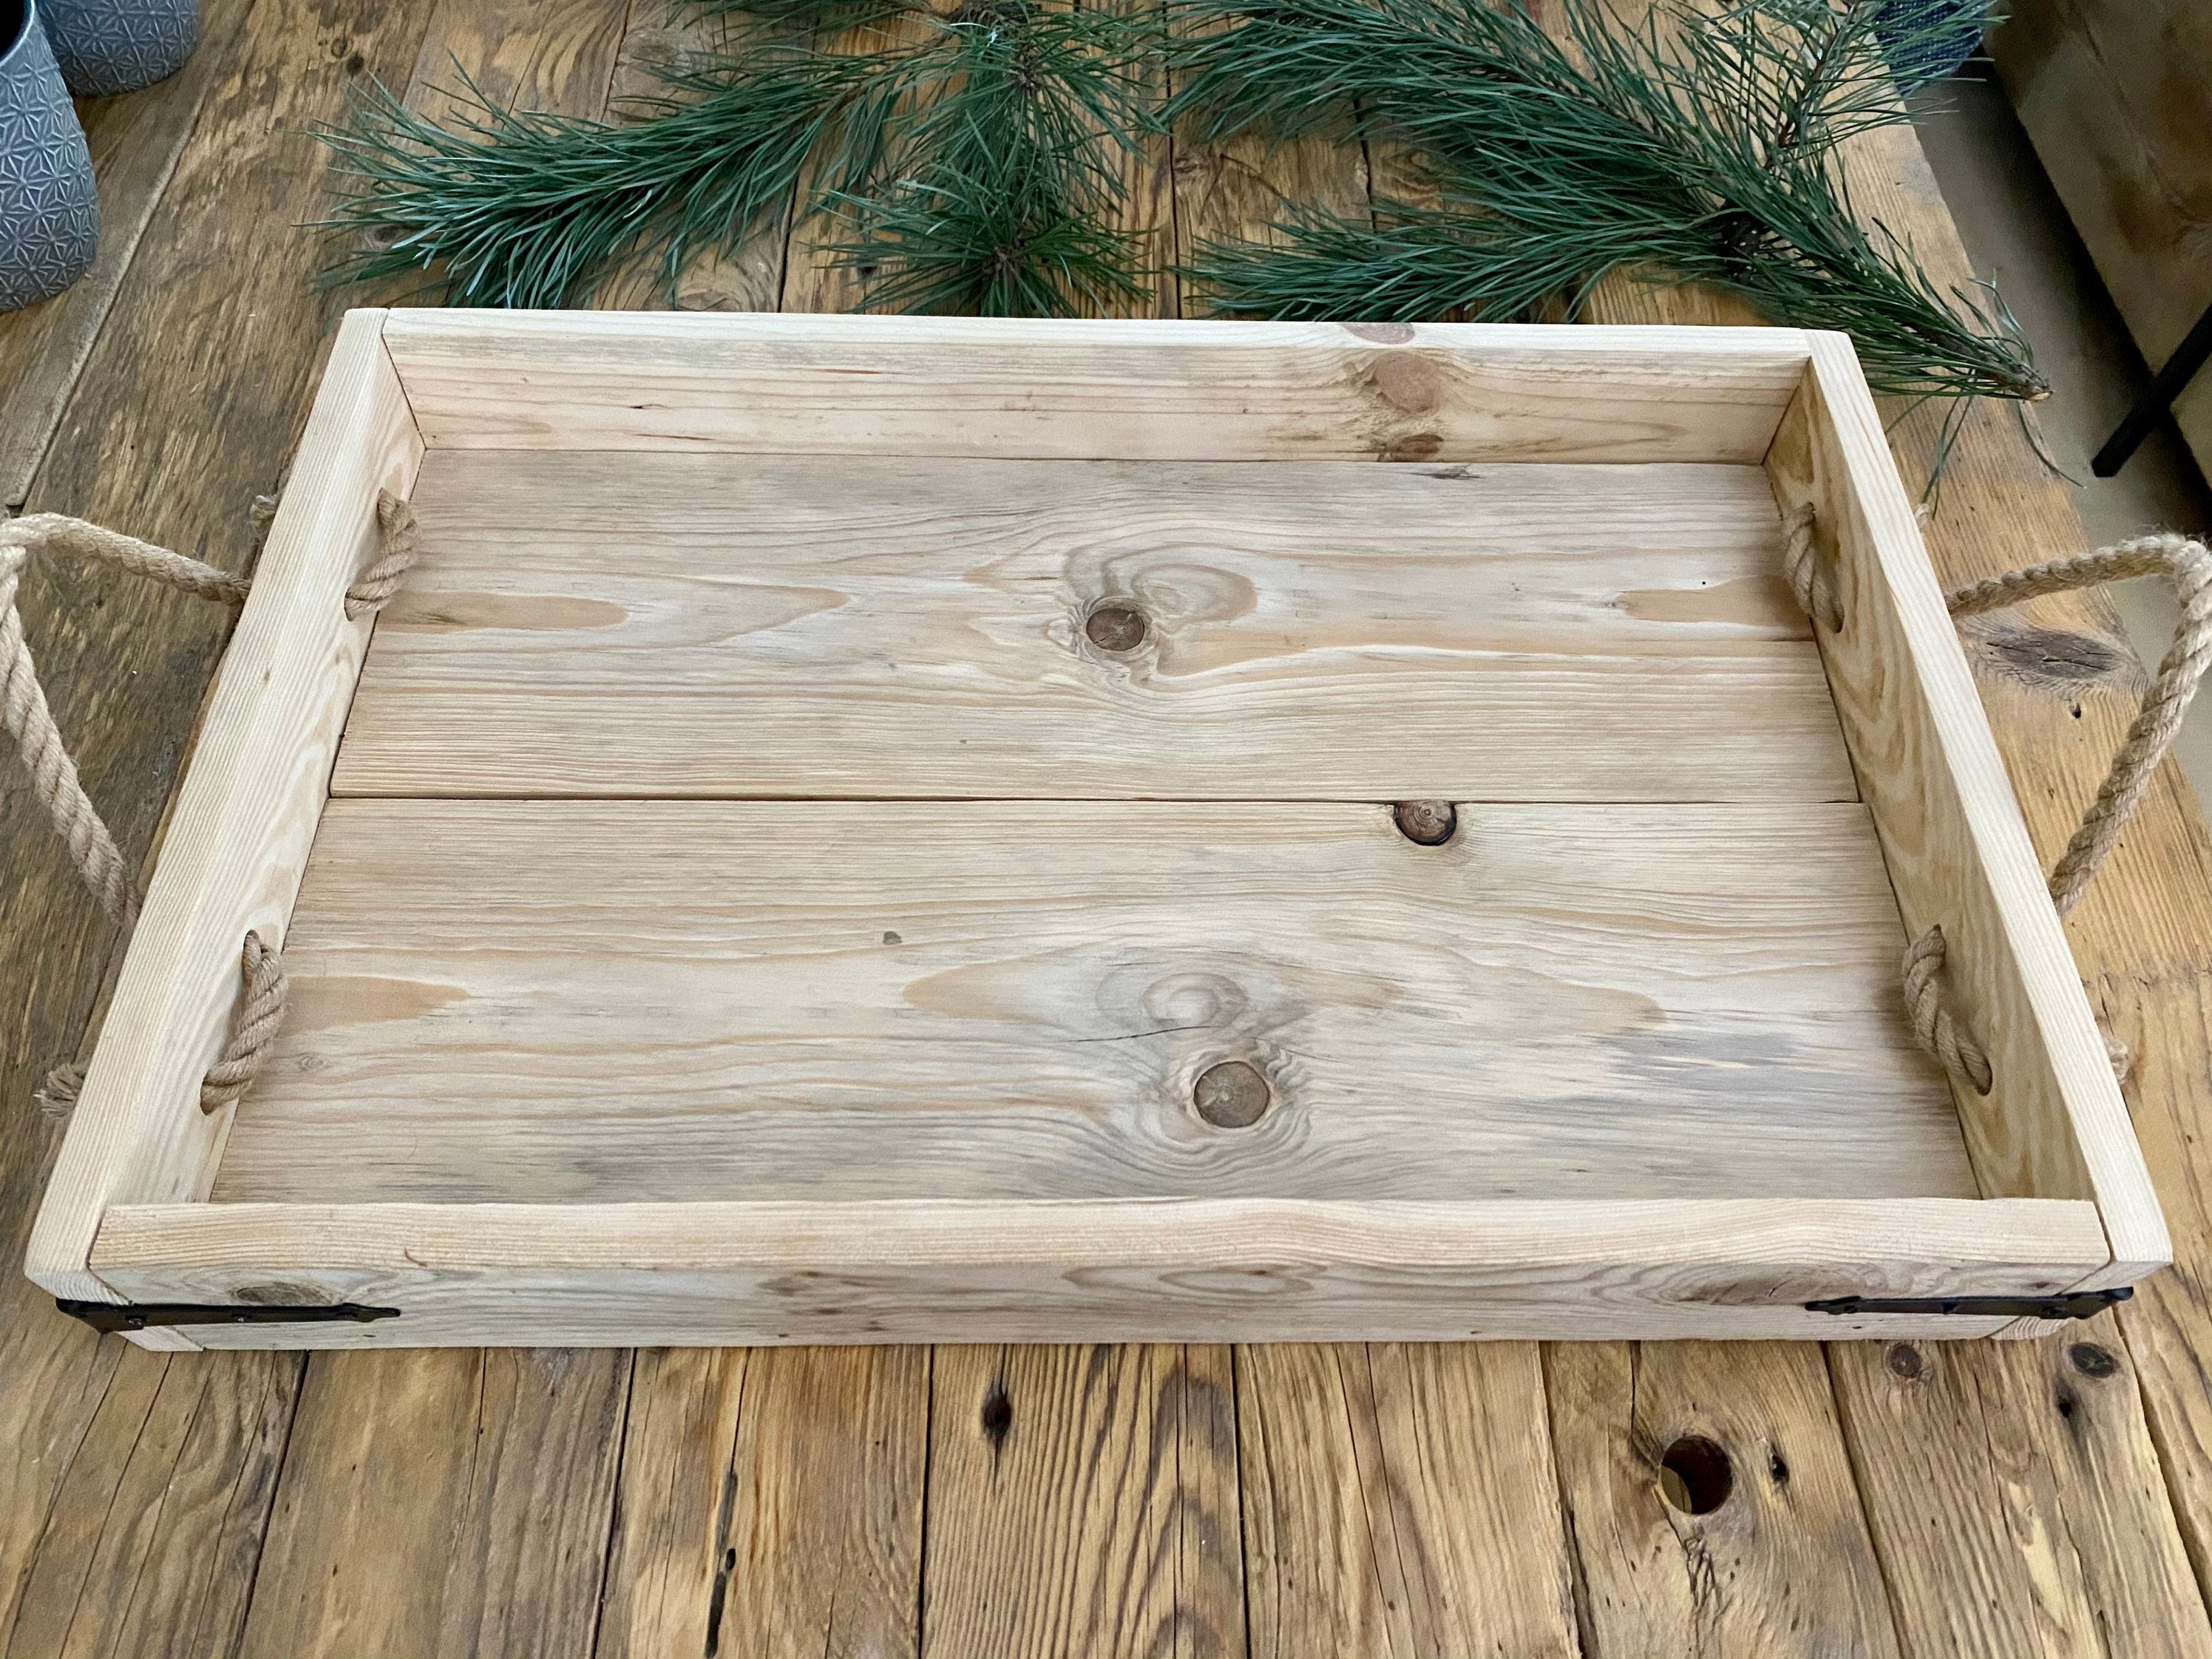 Classic Rustic Handmade Wooden Serving Tray With Handles 